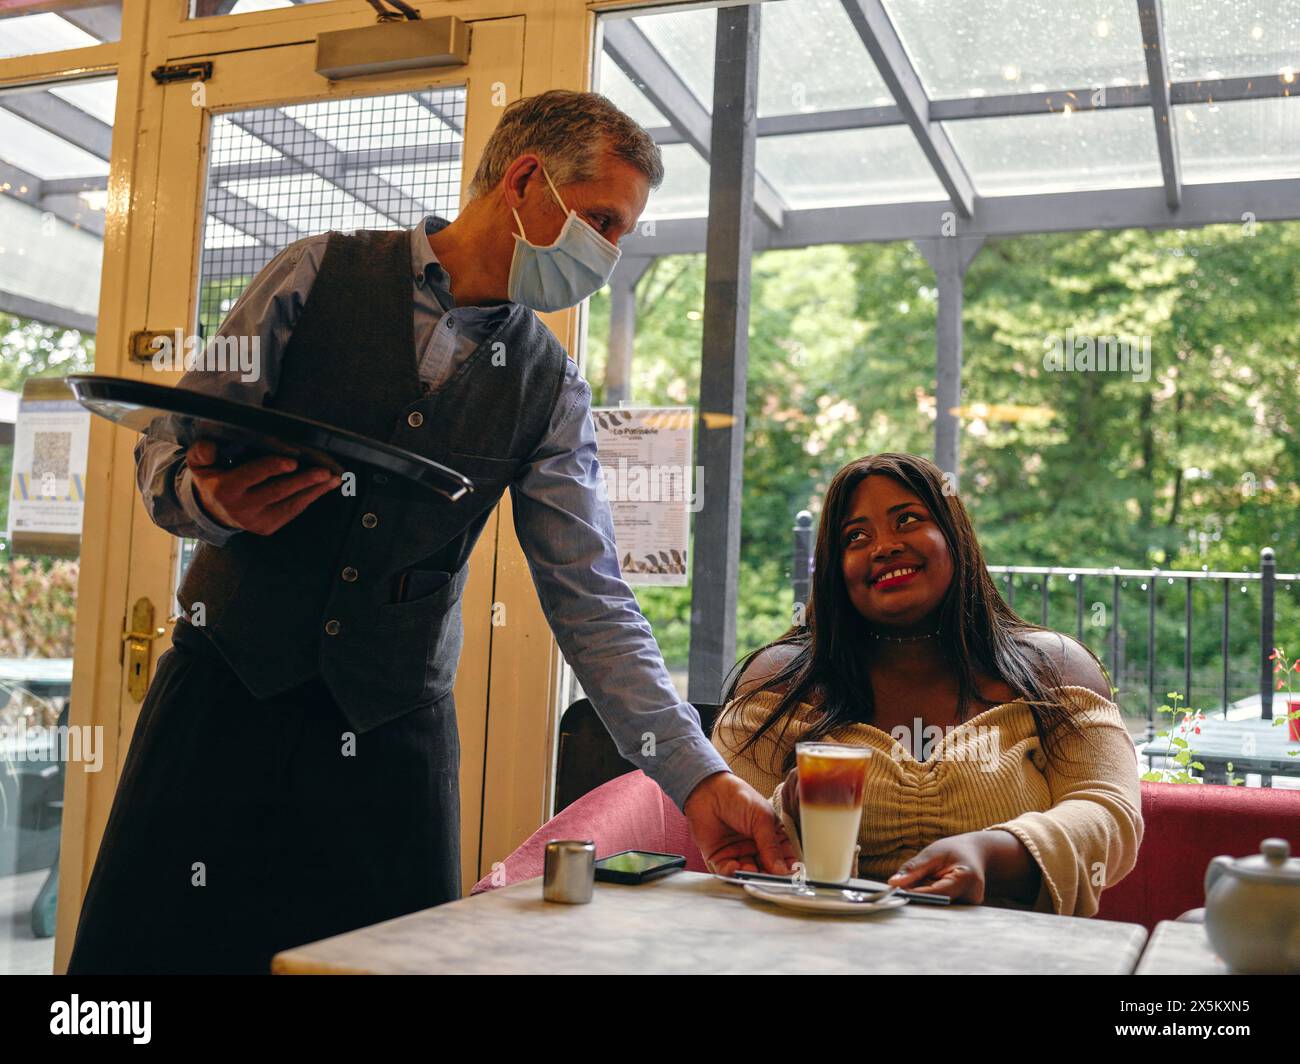 Waiter in face masks serving latte to smiling woman in cafe Stock Photo